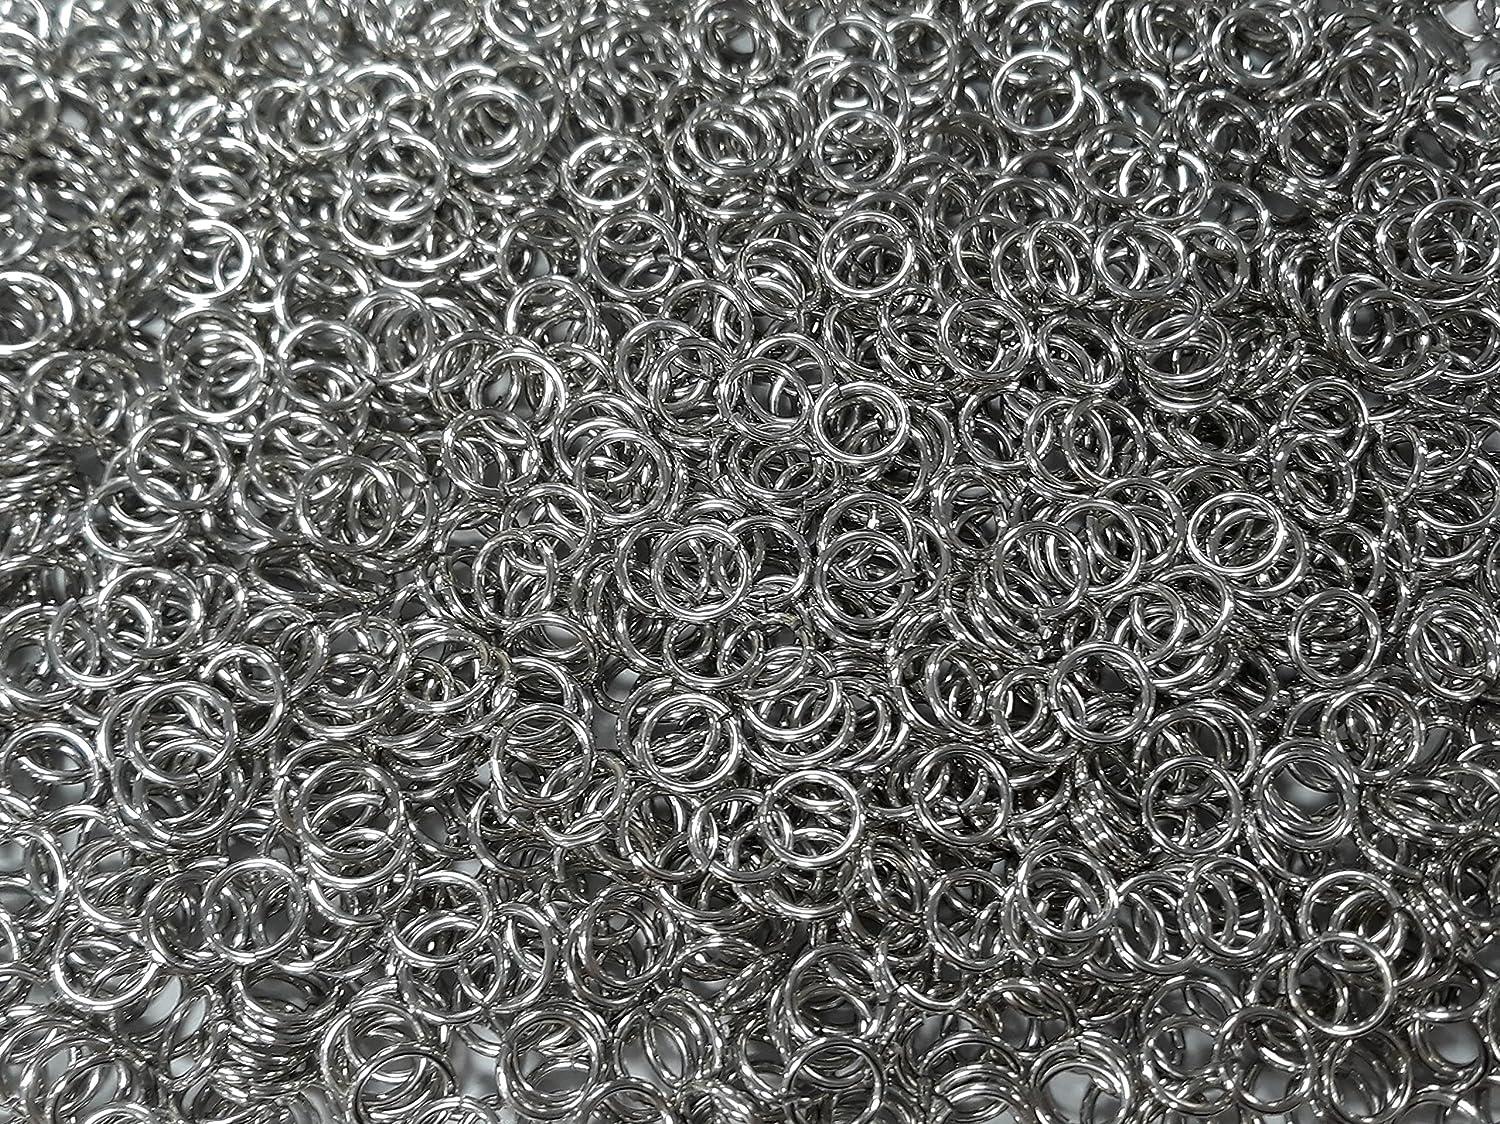 1 Pound Bright Aluminum Chainmail Jump Rings 16G 5/16 ID (3000+ Rings)  16SWG 5/16 ID